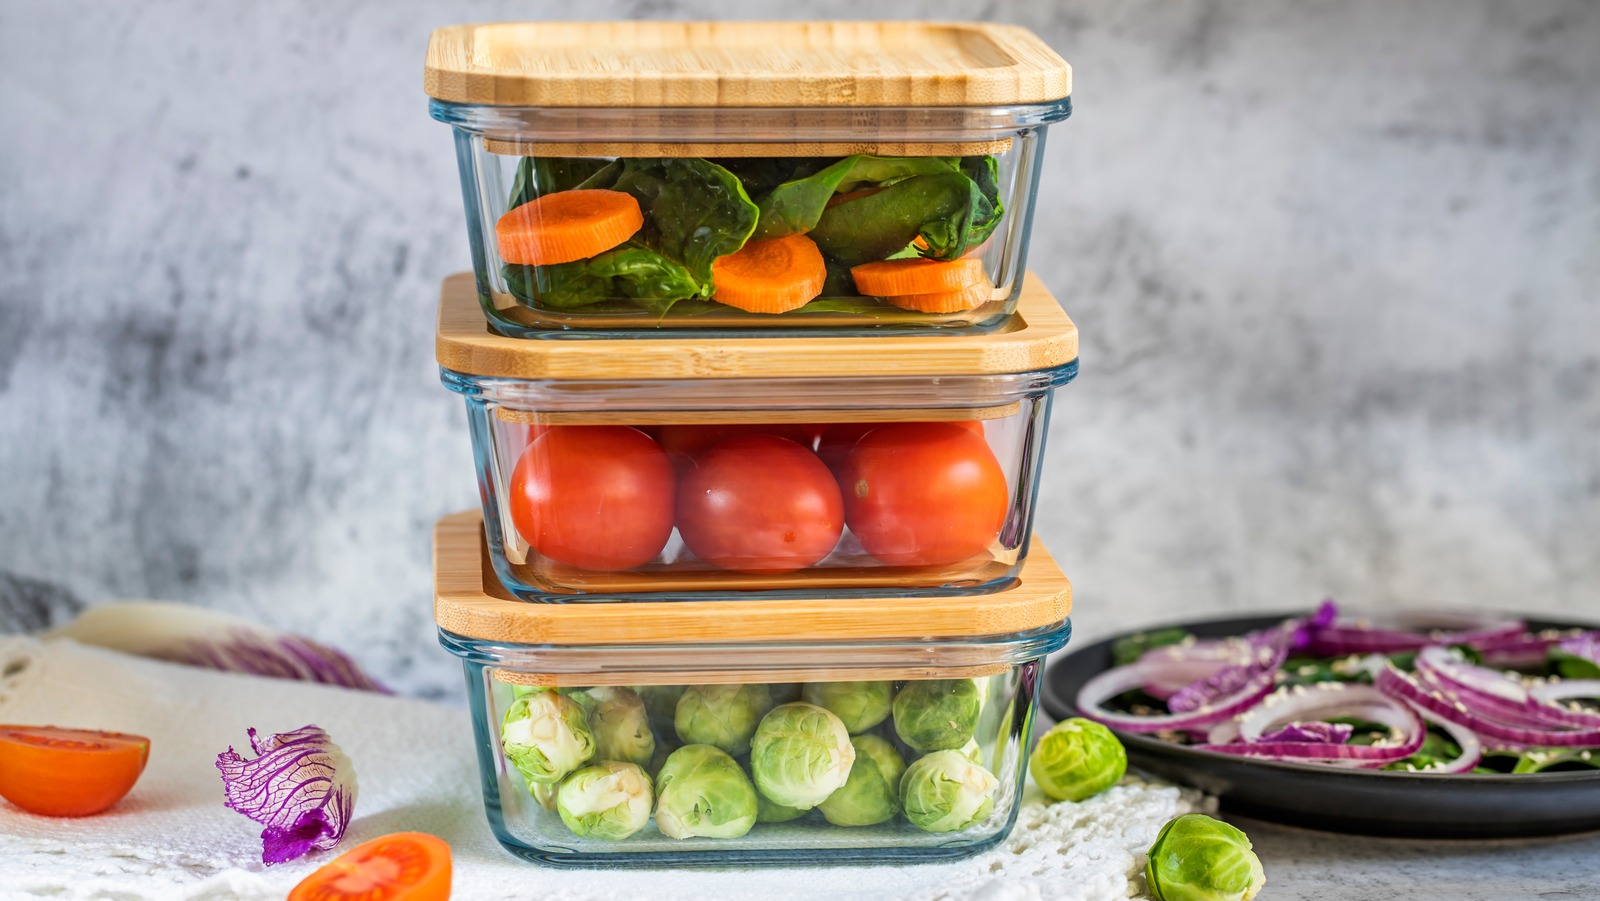 https://www.tastingtable.com/img/gallery/the-clever-cutting-board-set-up-you-need-for-easier-meal-prep/l-intro-1689272081.jpg